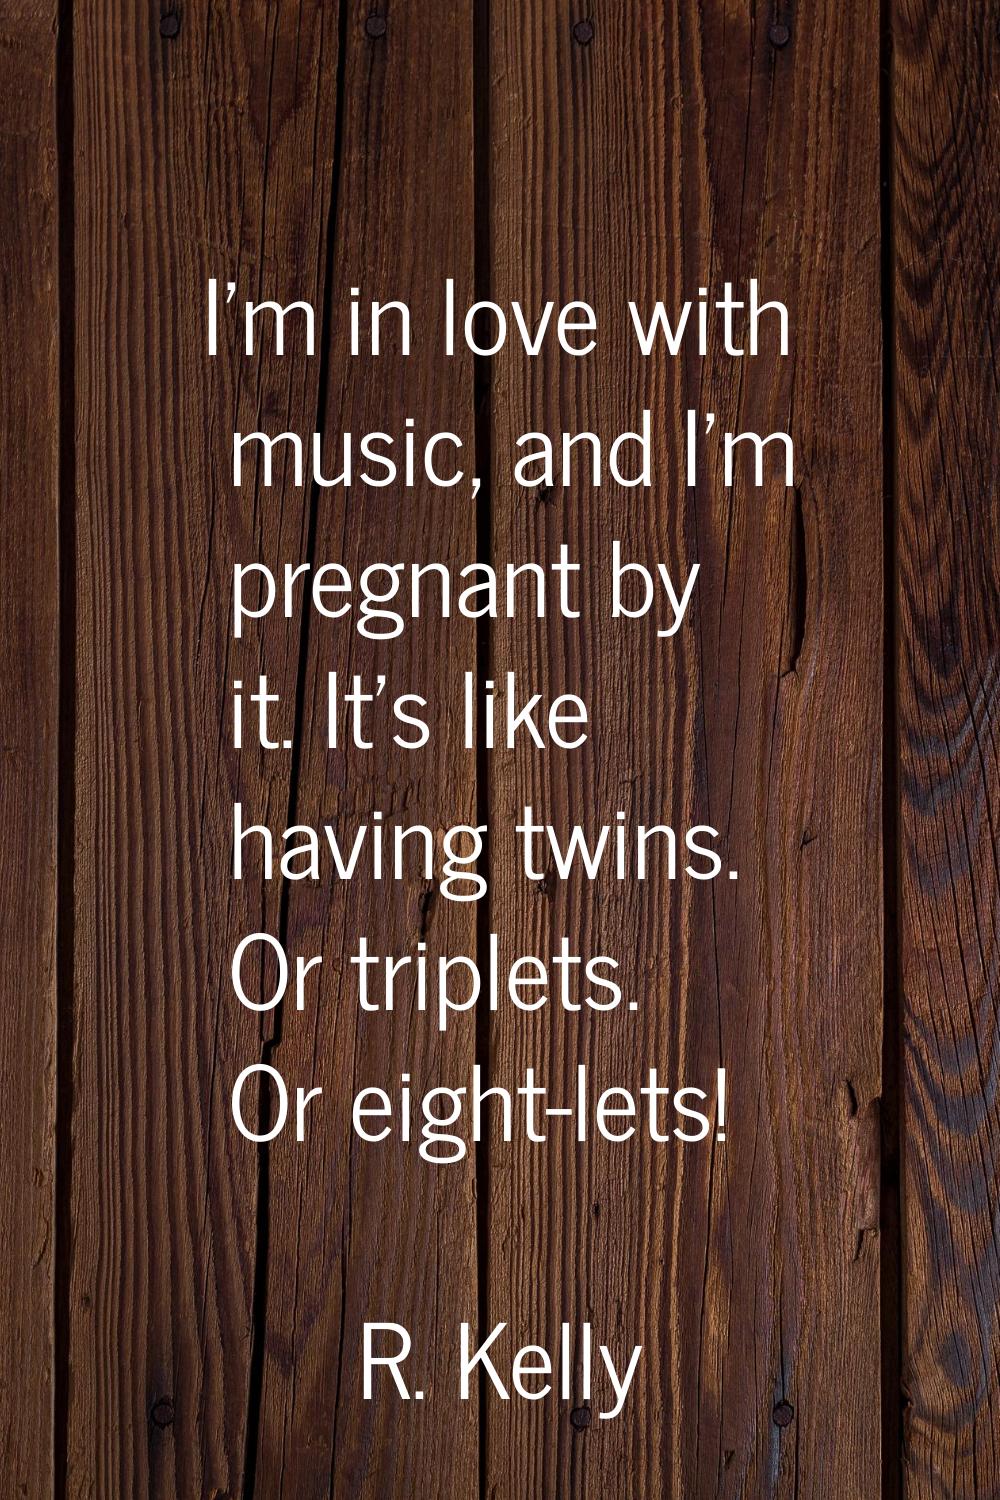 I'm in love with music, and I'm pregnant by it. It's like having twins. Or triplets. Or eight-lets!